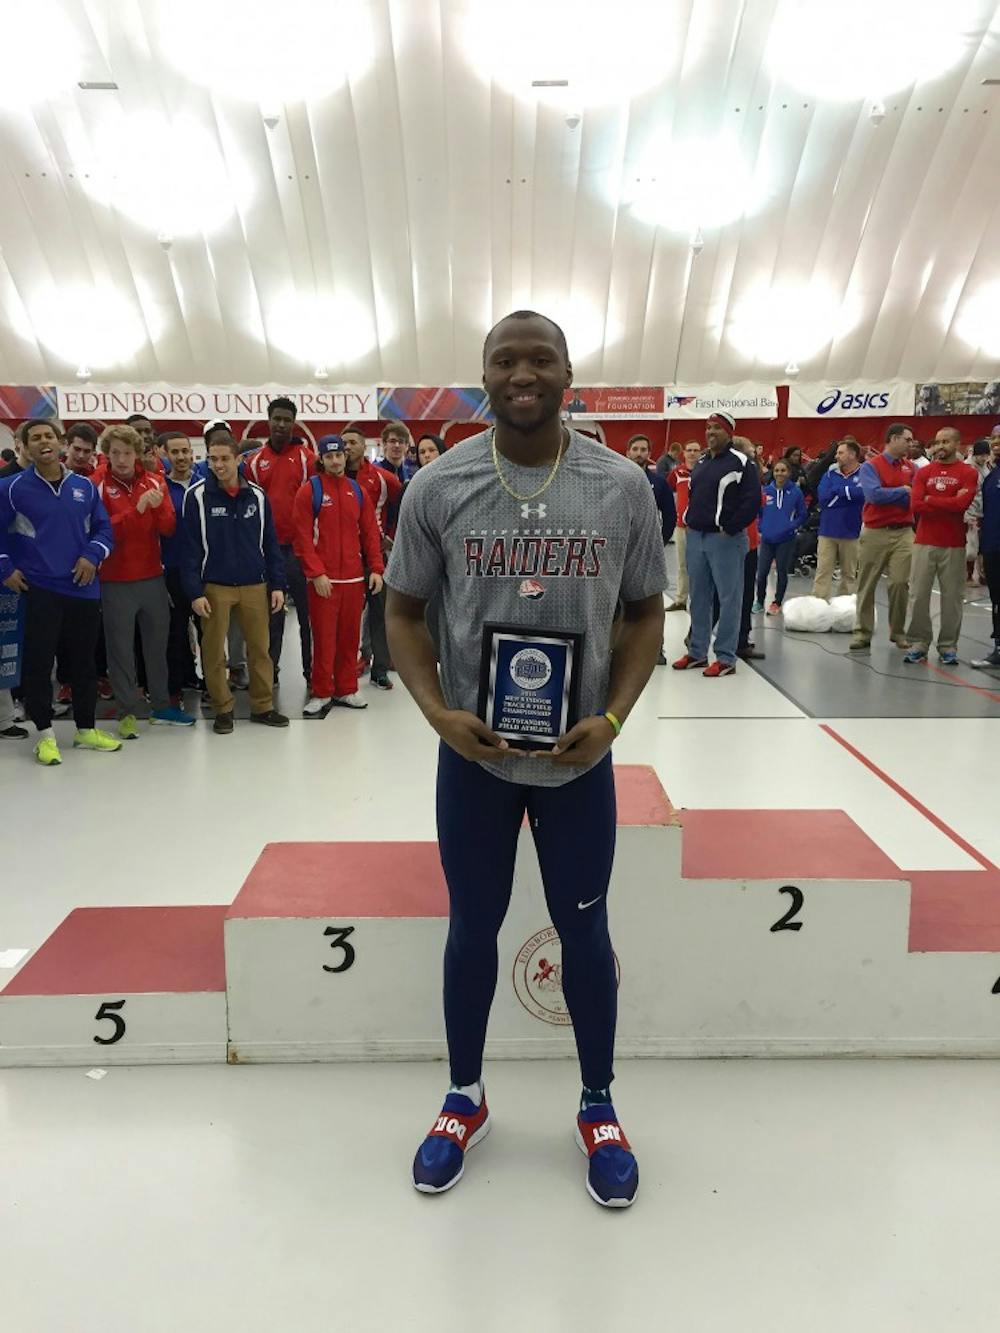 Indoor track sprints its way to PSAC Championship title